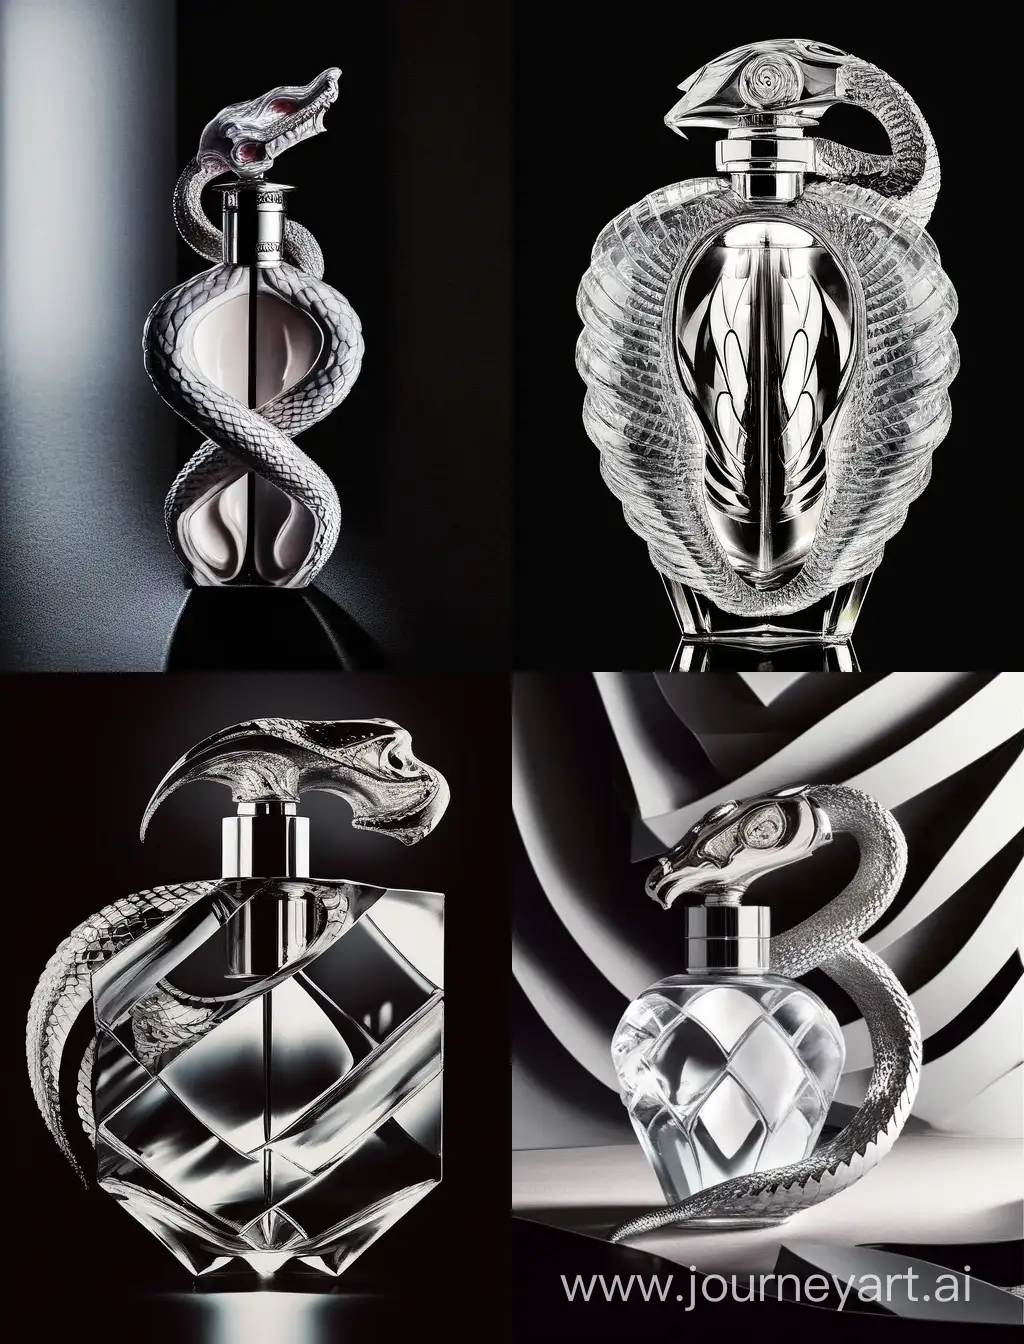 Sultry-Serpentine-SilverMirrored-Perfume-Empowering-Provocative-and-Stunning-Elegance